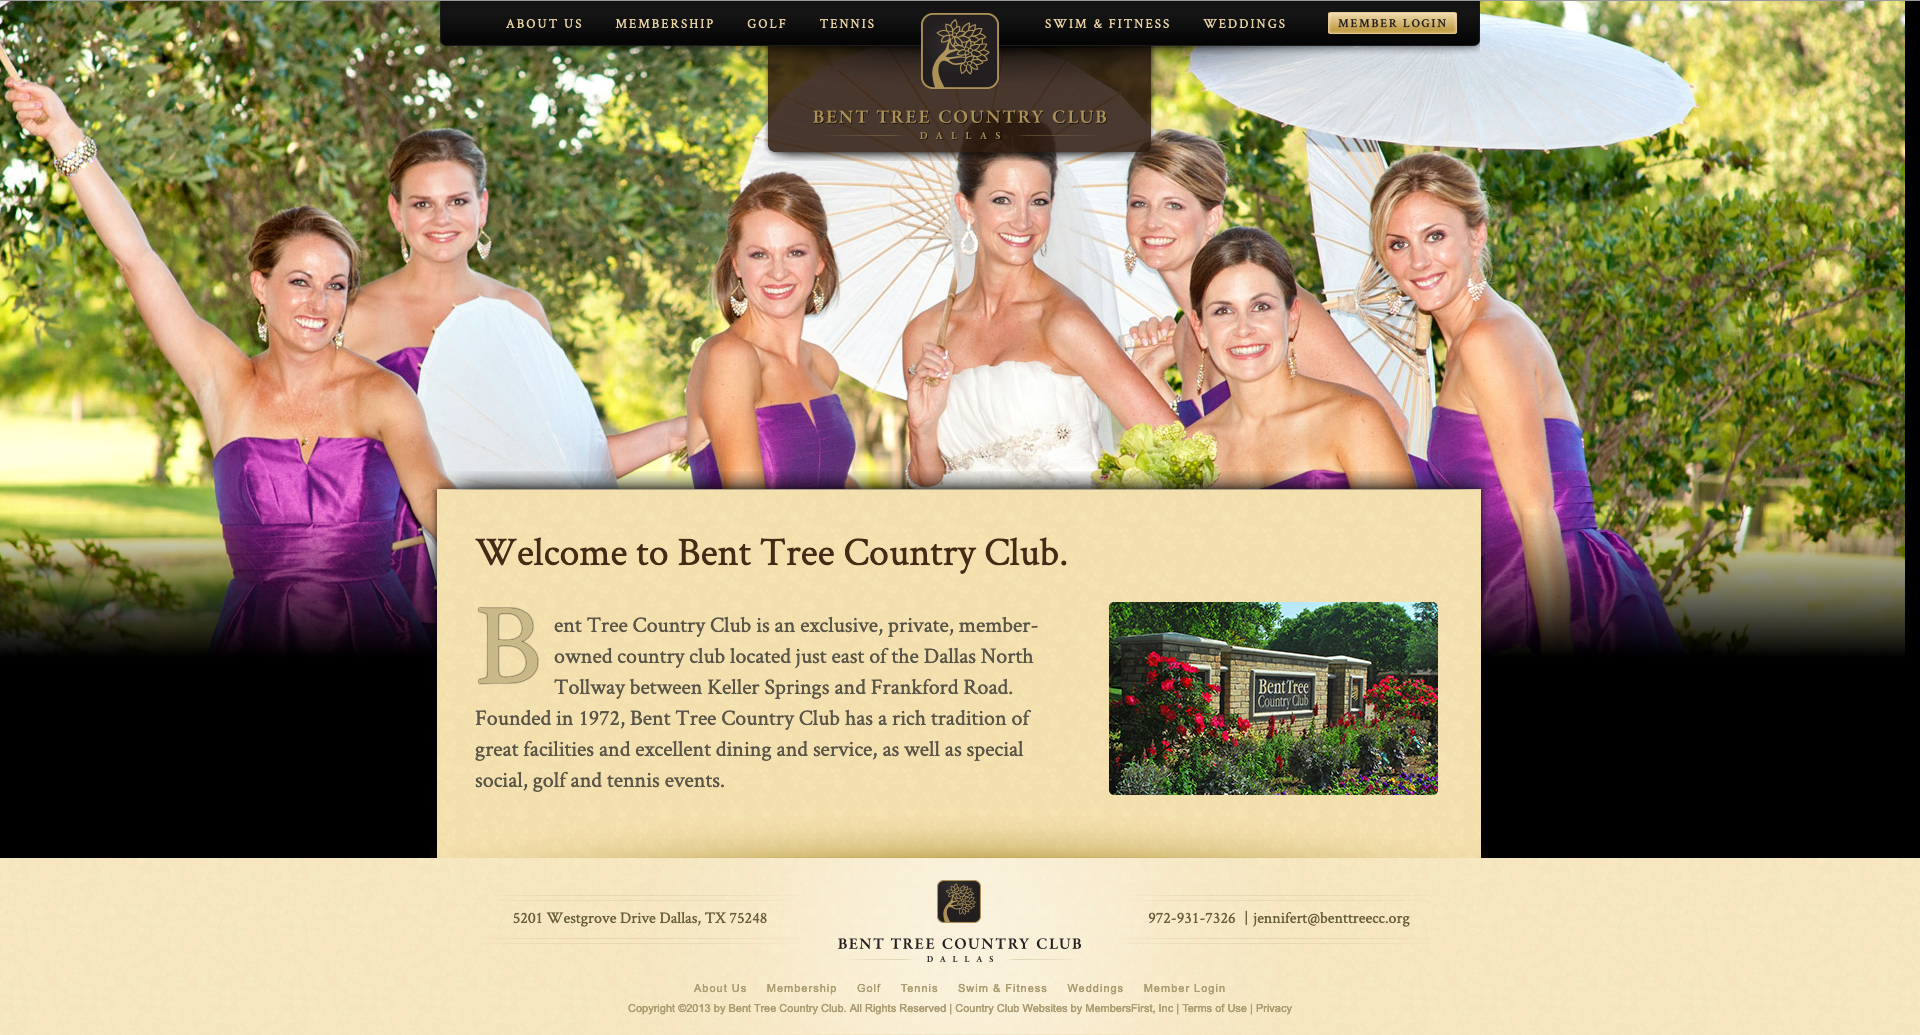 The final Bent Tree Country Club design I did.